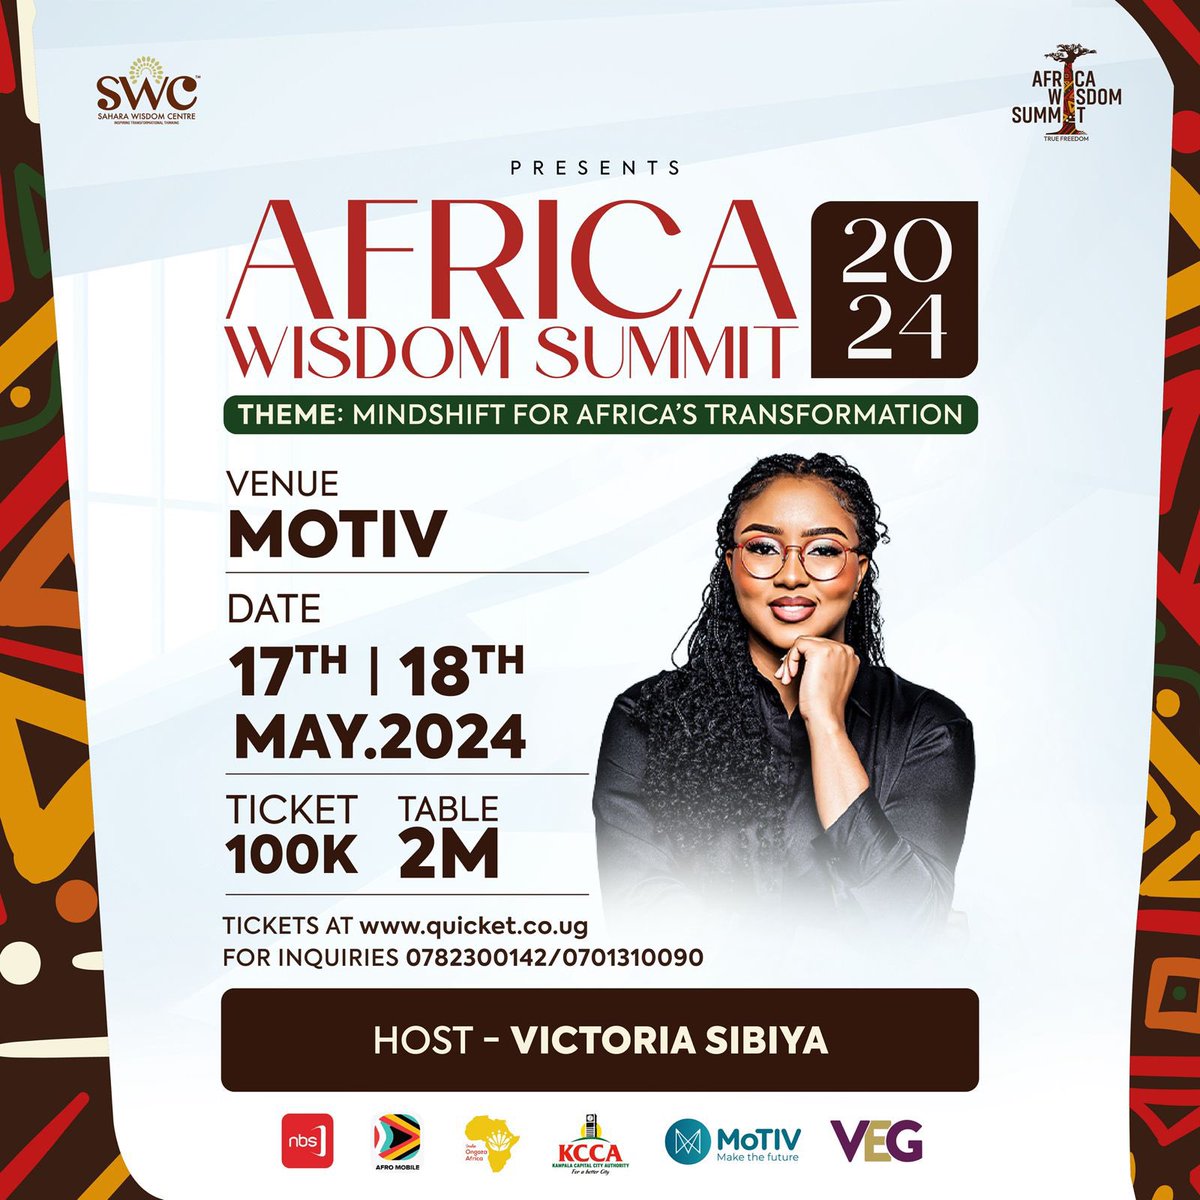 The Africa Wisdom Summit 2024! Welcome our amazing host @victoria_sibiya 📆 17th-18th May @MotivUG ⌚ 8 am Brought to you by Sahara Wisdom Center on Theme; 'Mindshift for Africa's Transformation' #AfricaWisdomSummit #AFWS2024